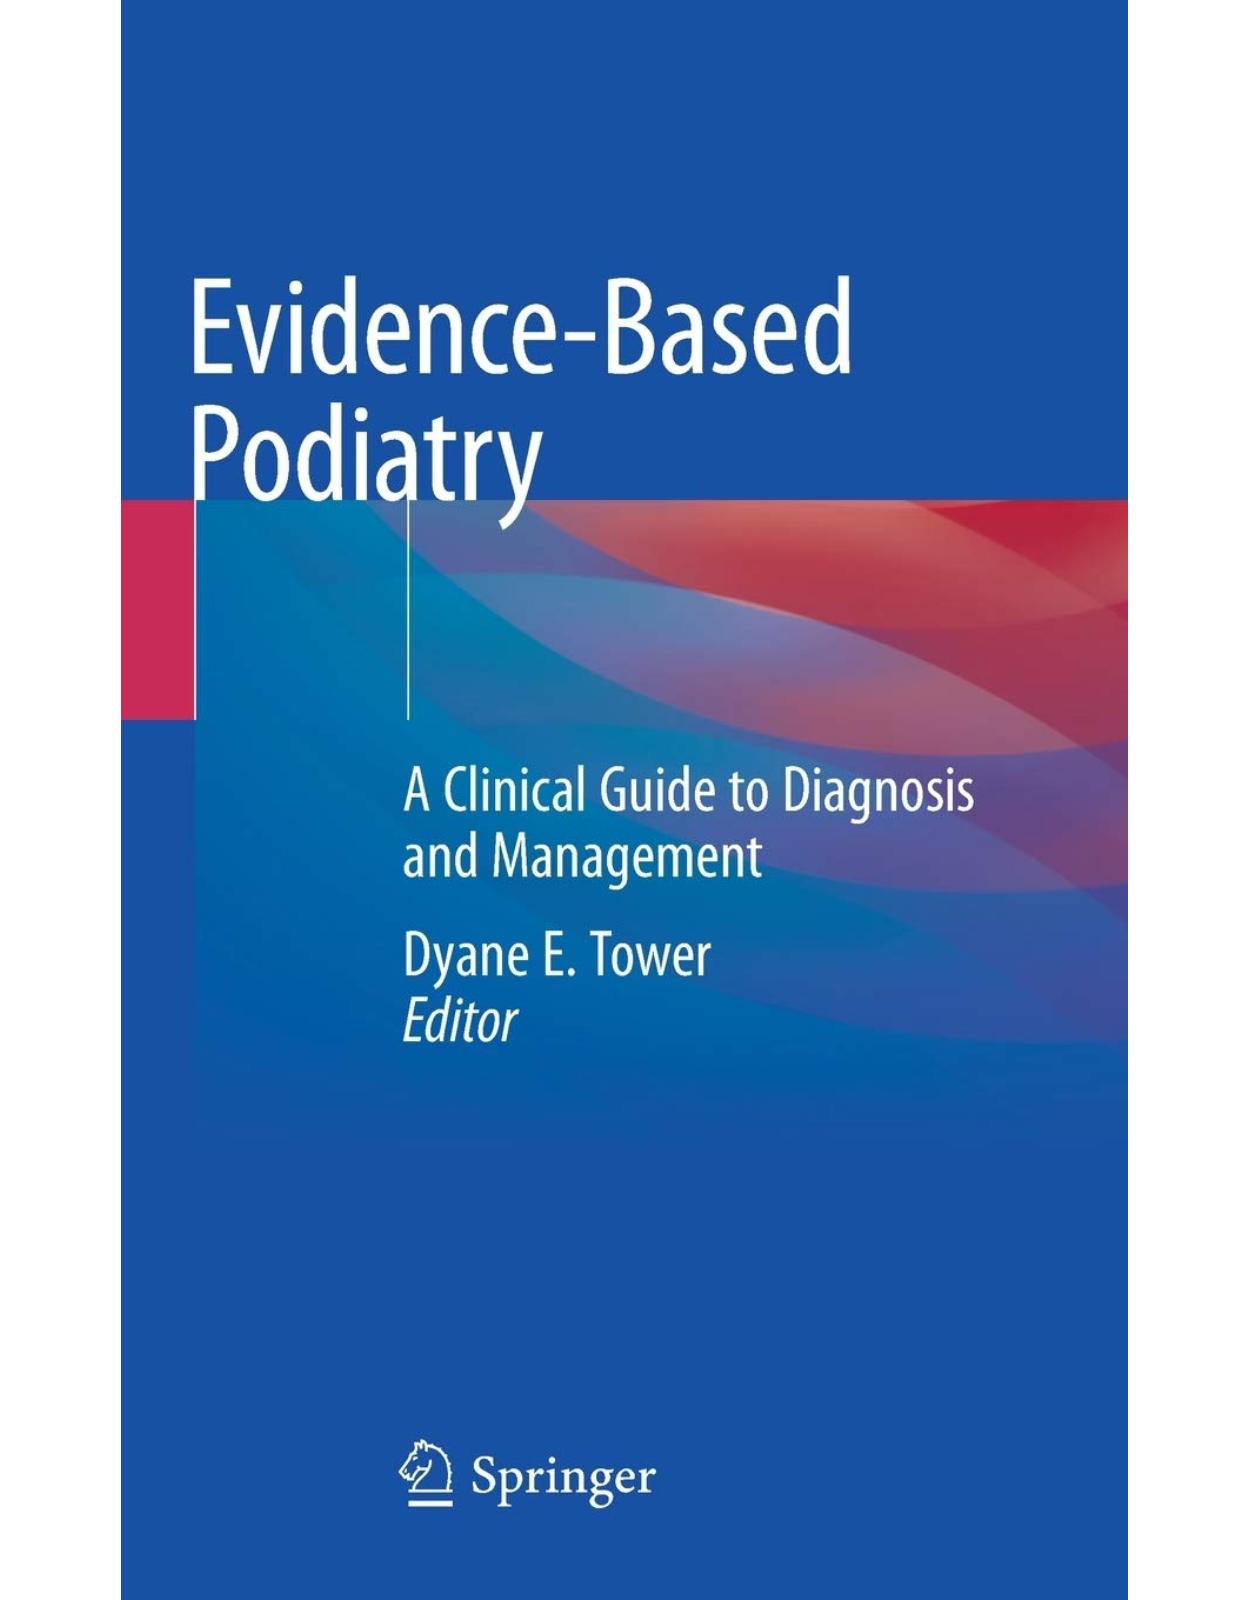 Evidence-Based Podiatry: A Clinical Guide to Diagnosis and Management